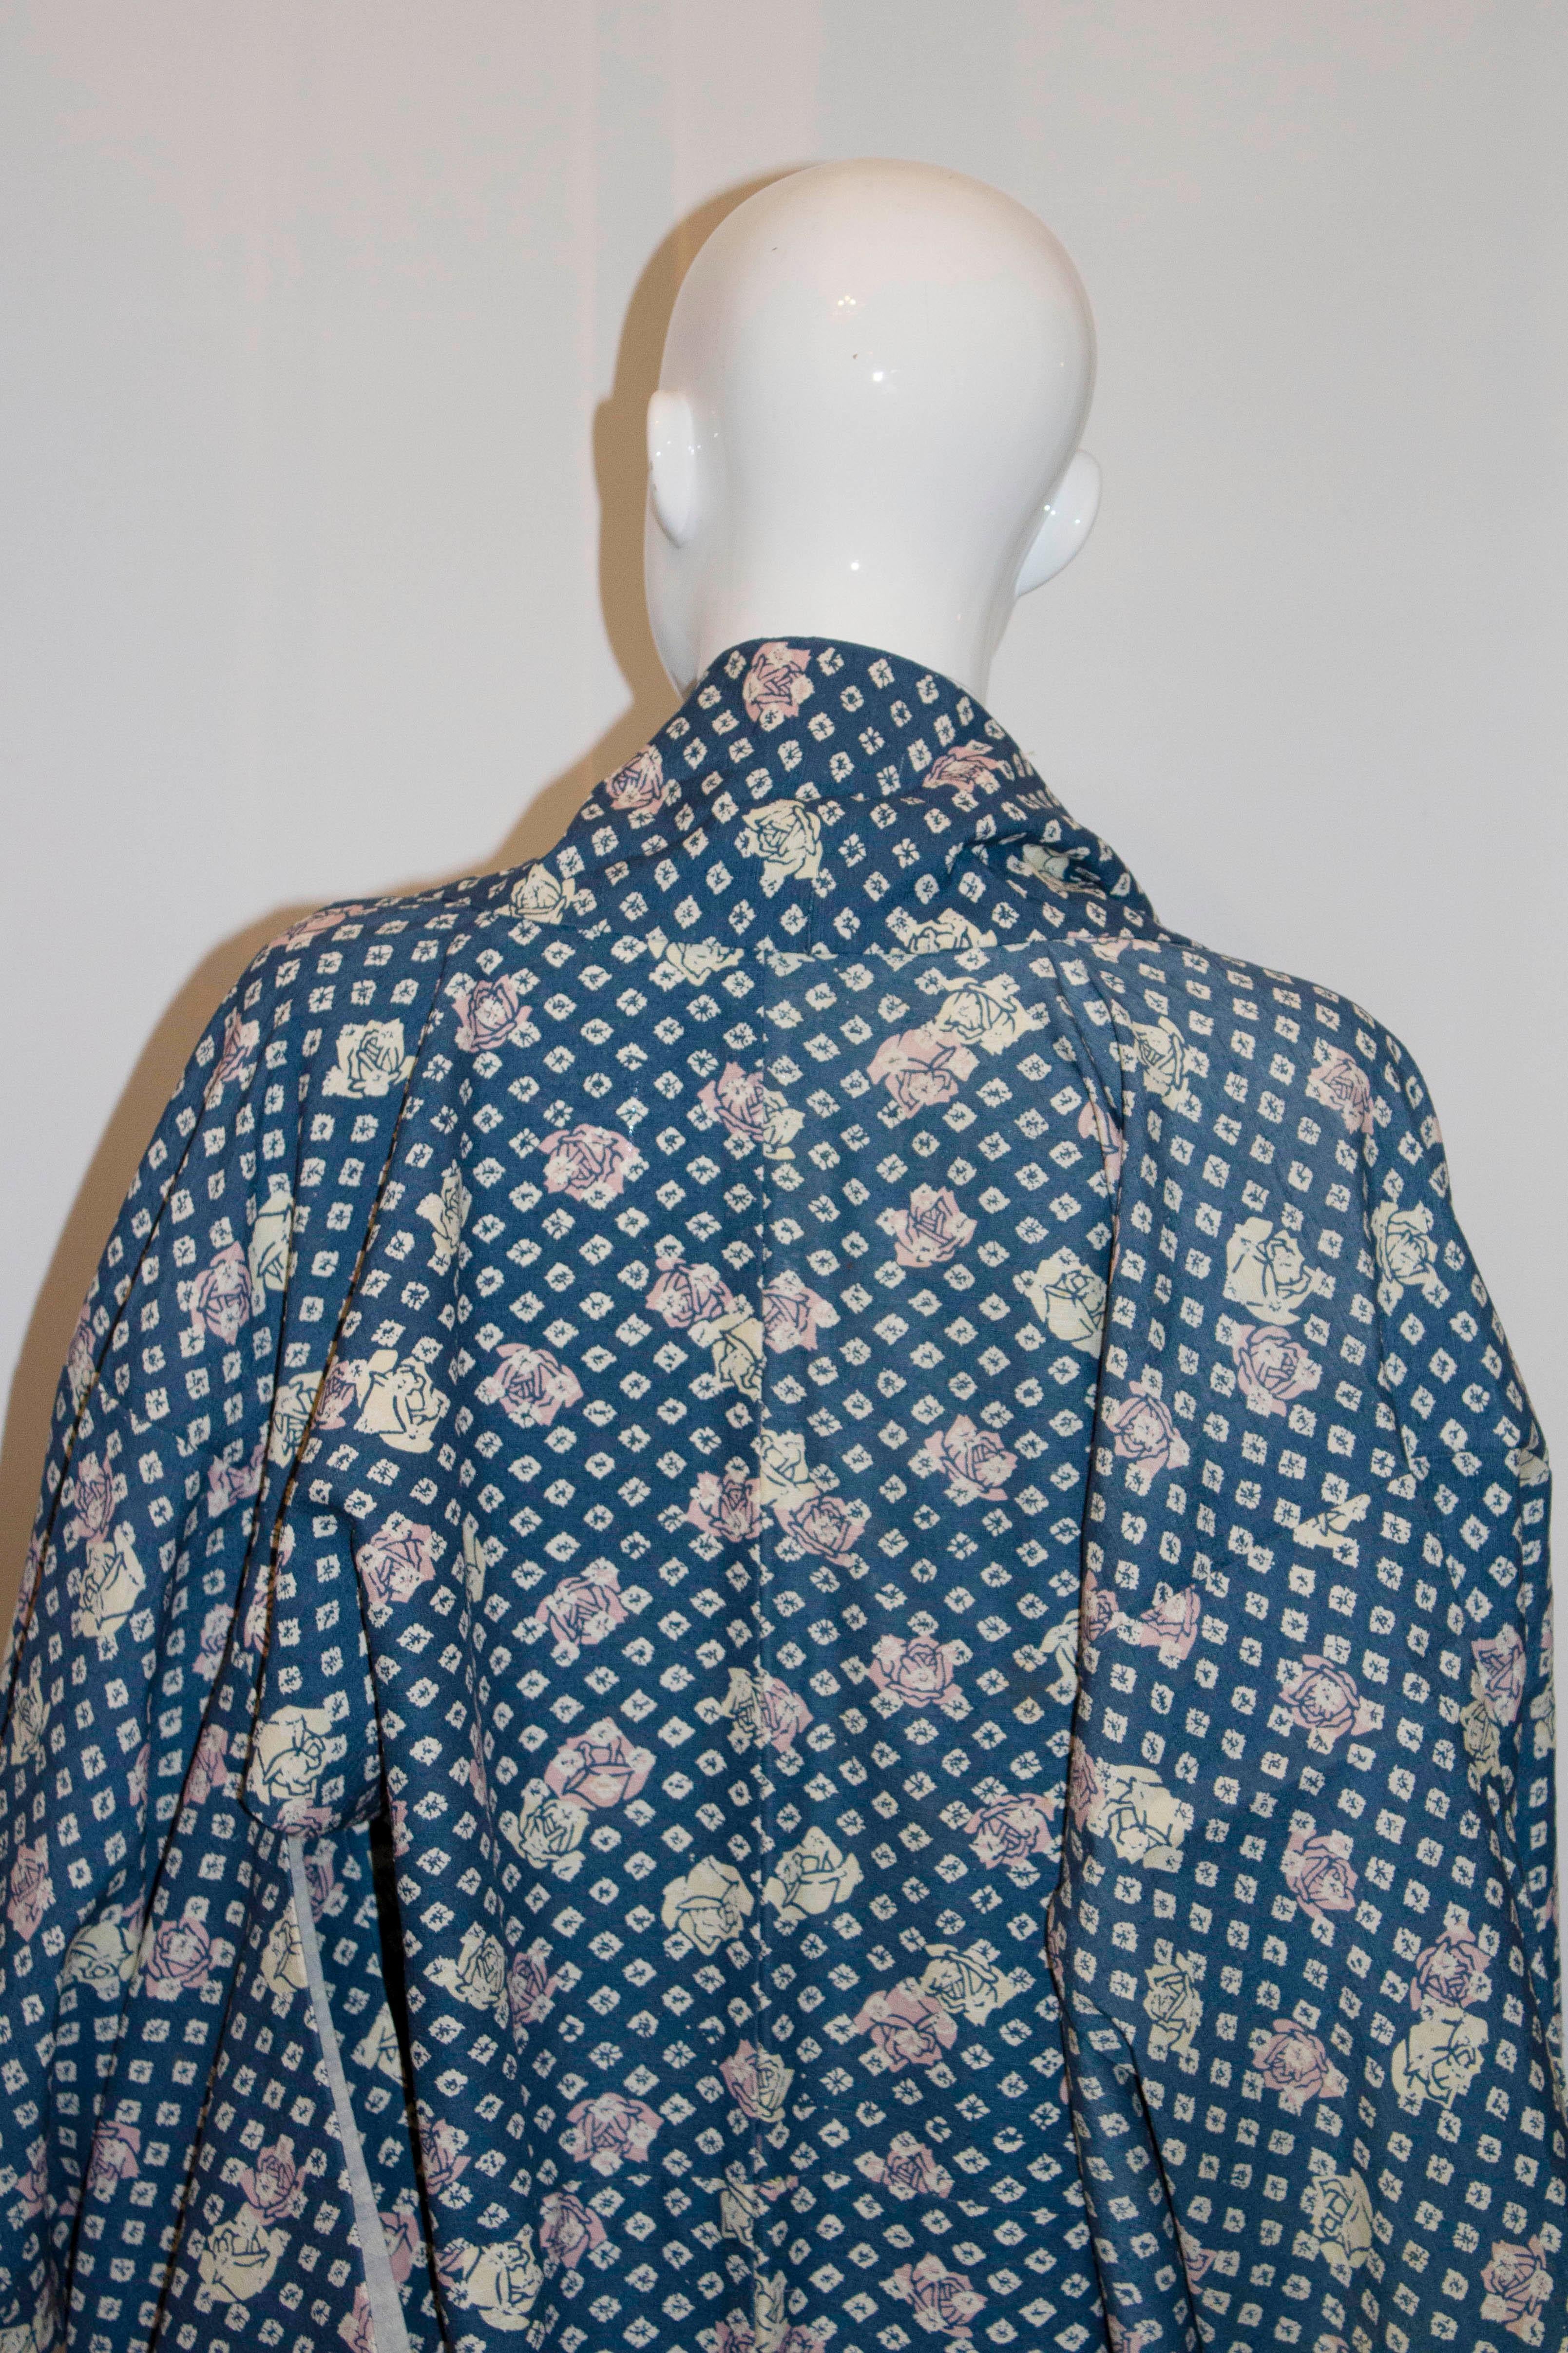 A vintage kimono from Kyoto dating from the 1980s. It has flowers on a blue background and is lined in cotton.
Measurements: Length 63'' bust up to 46''